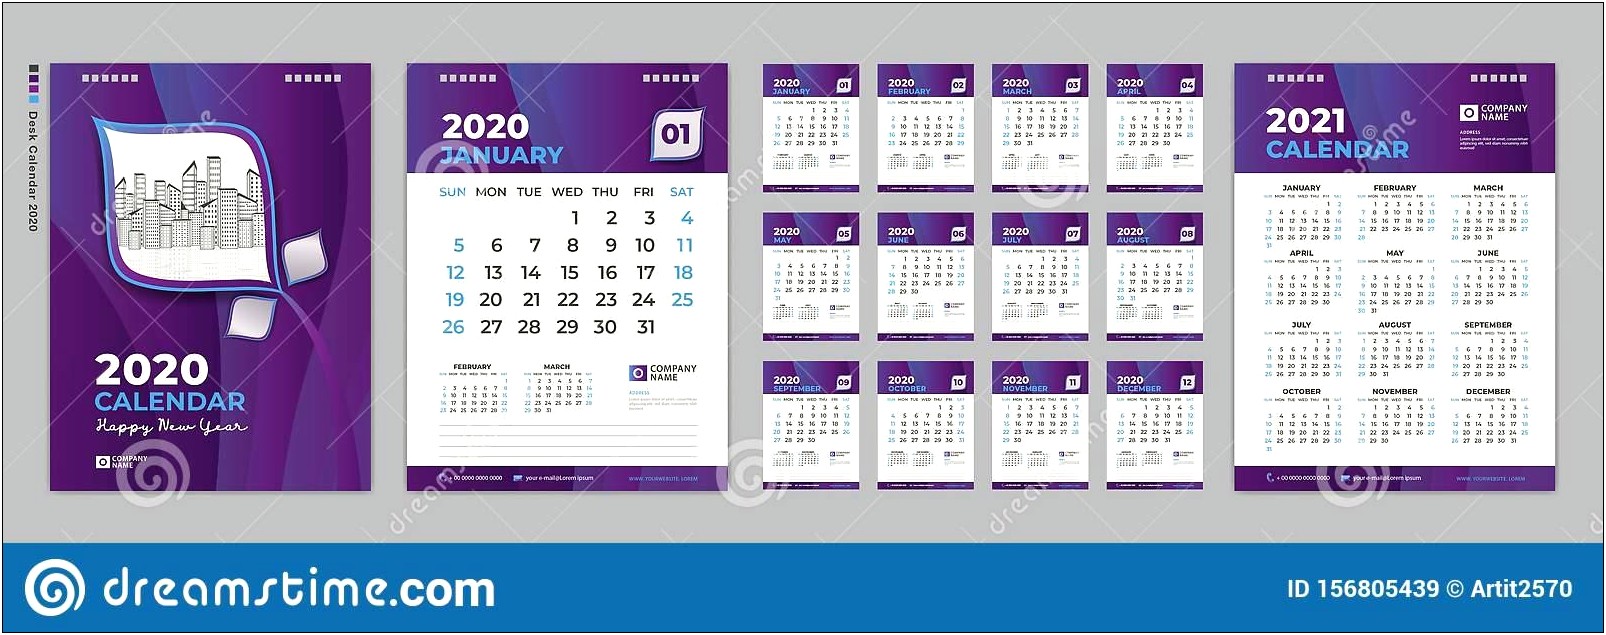 Free Calendar Template To Fill In